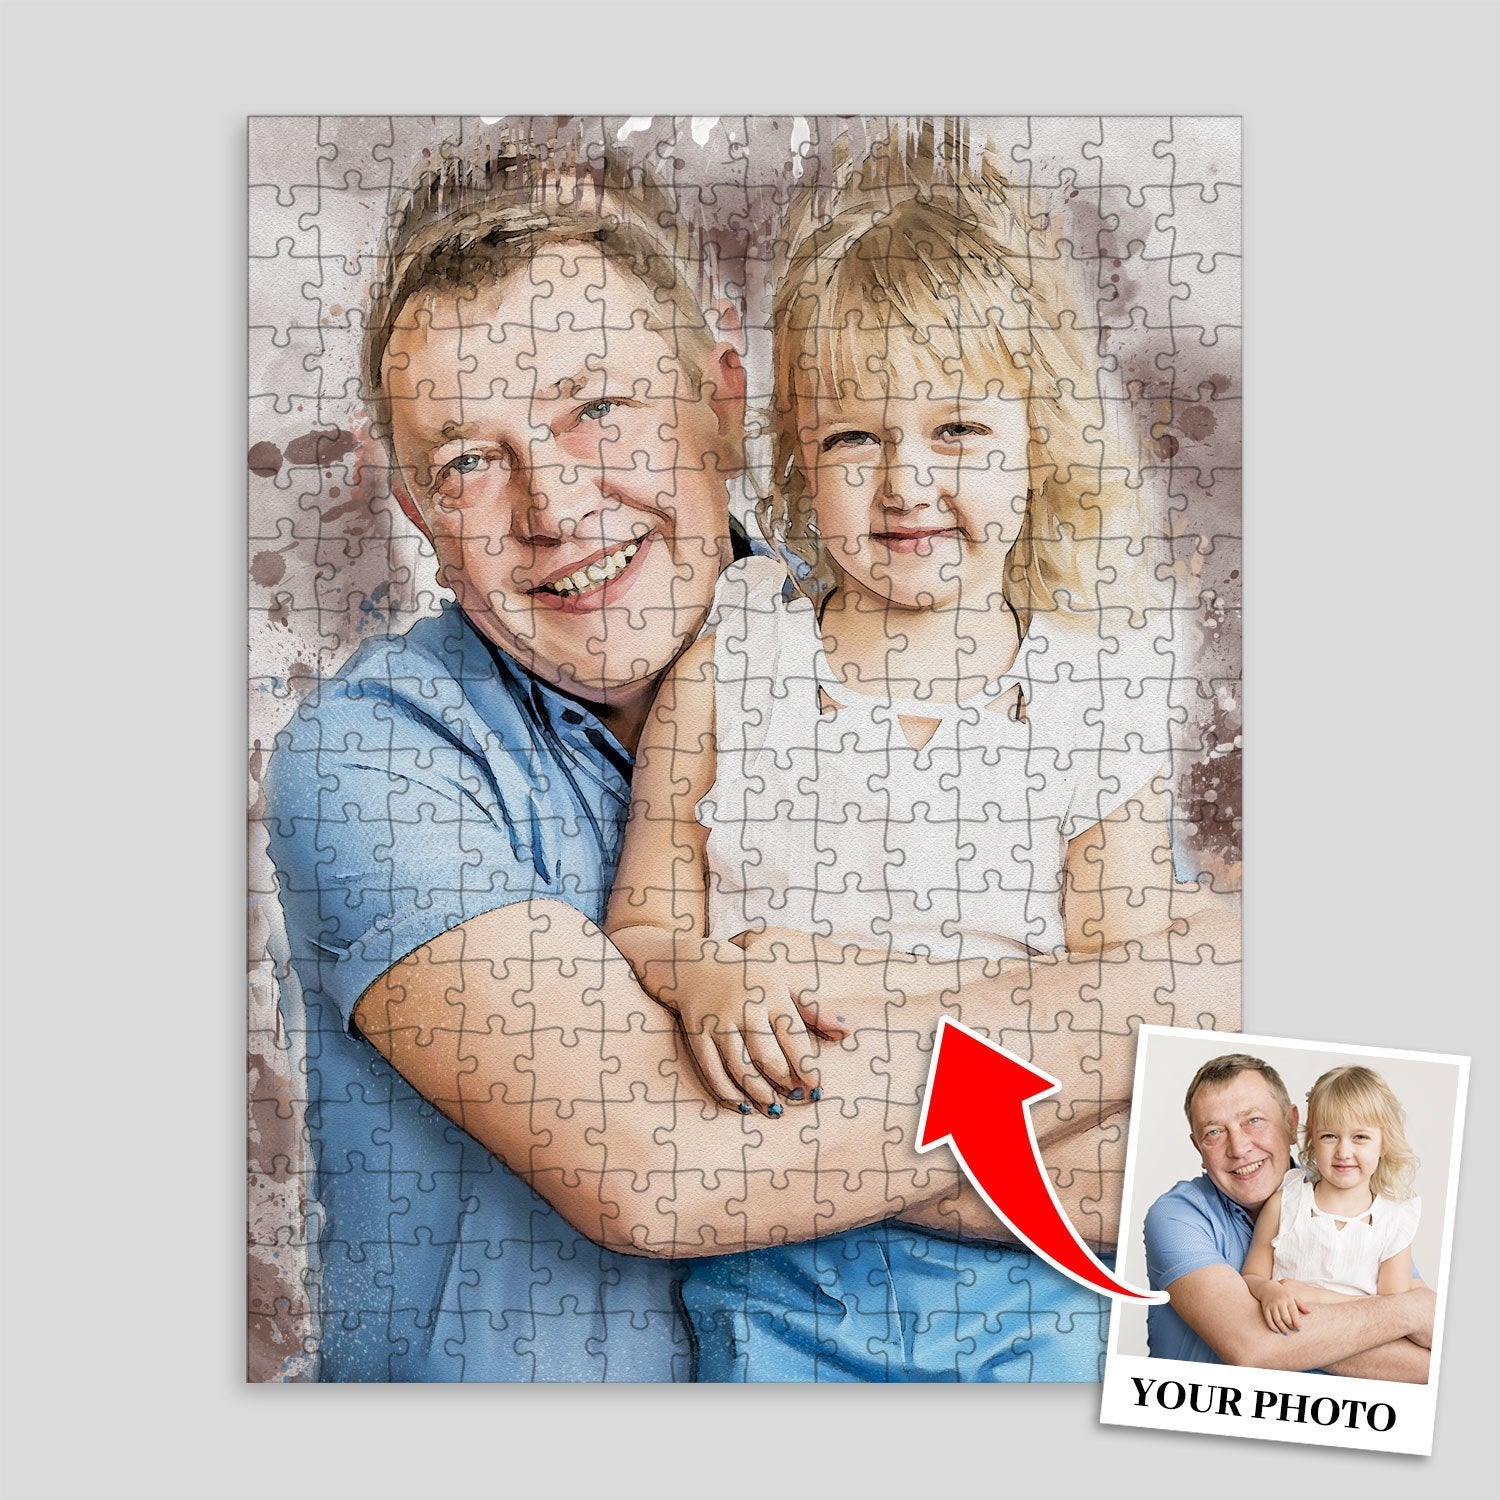 Custom Portrait From Photo, Watercolor Painting, Jigsaw Puzzles